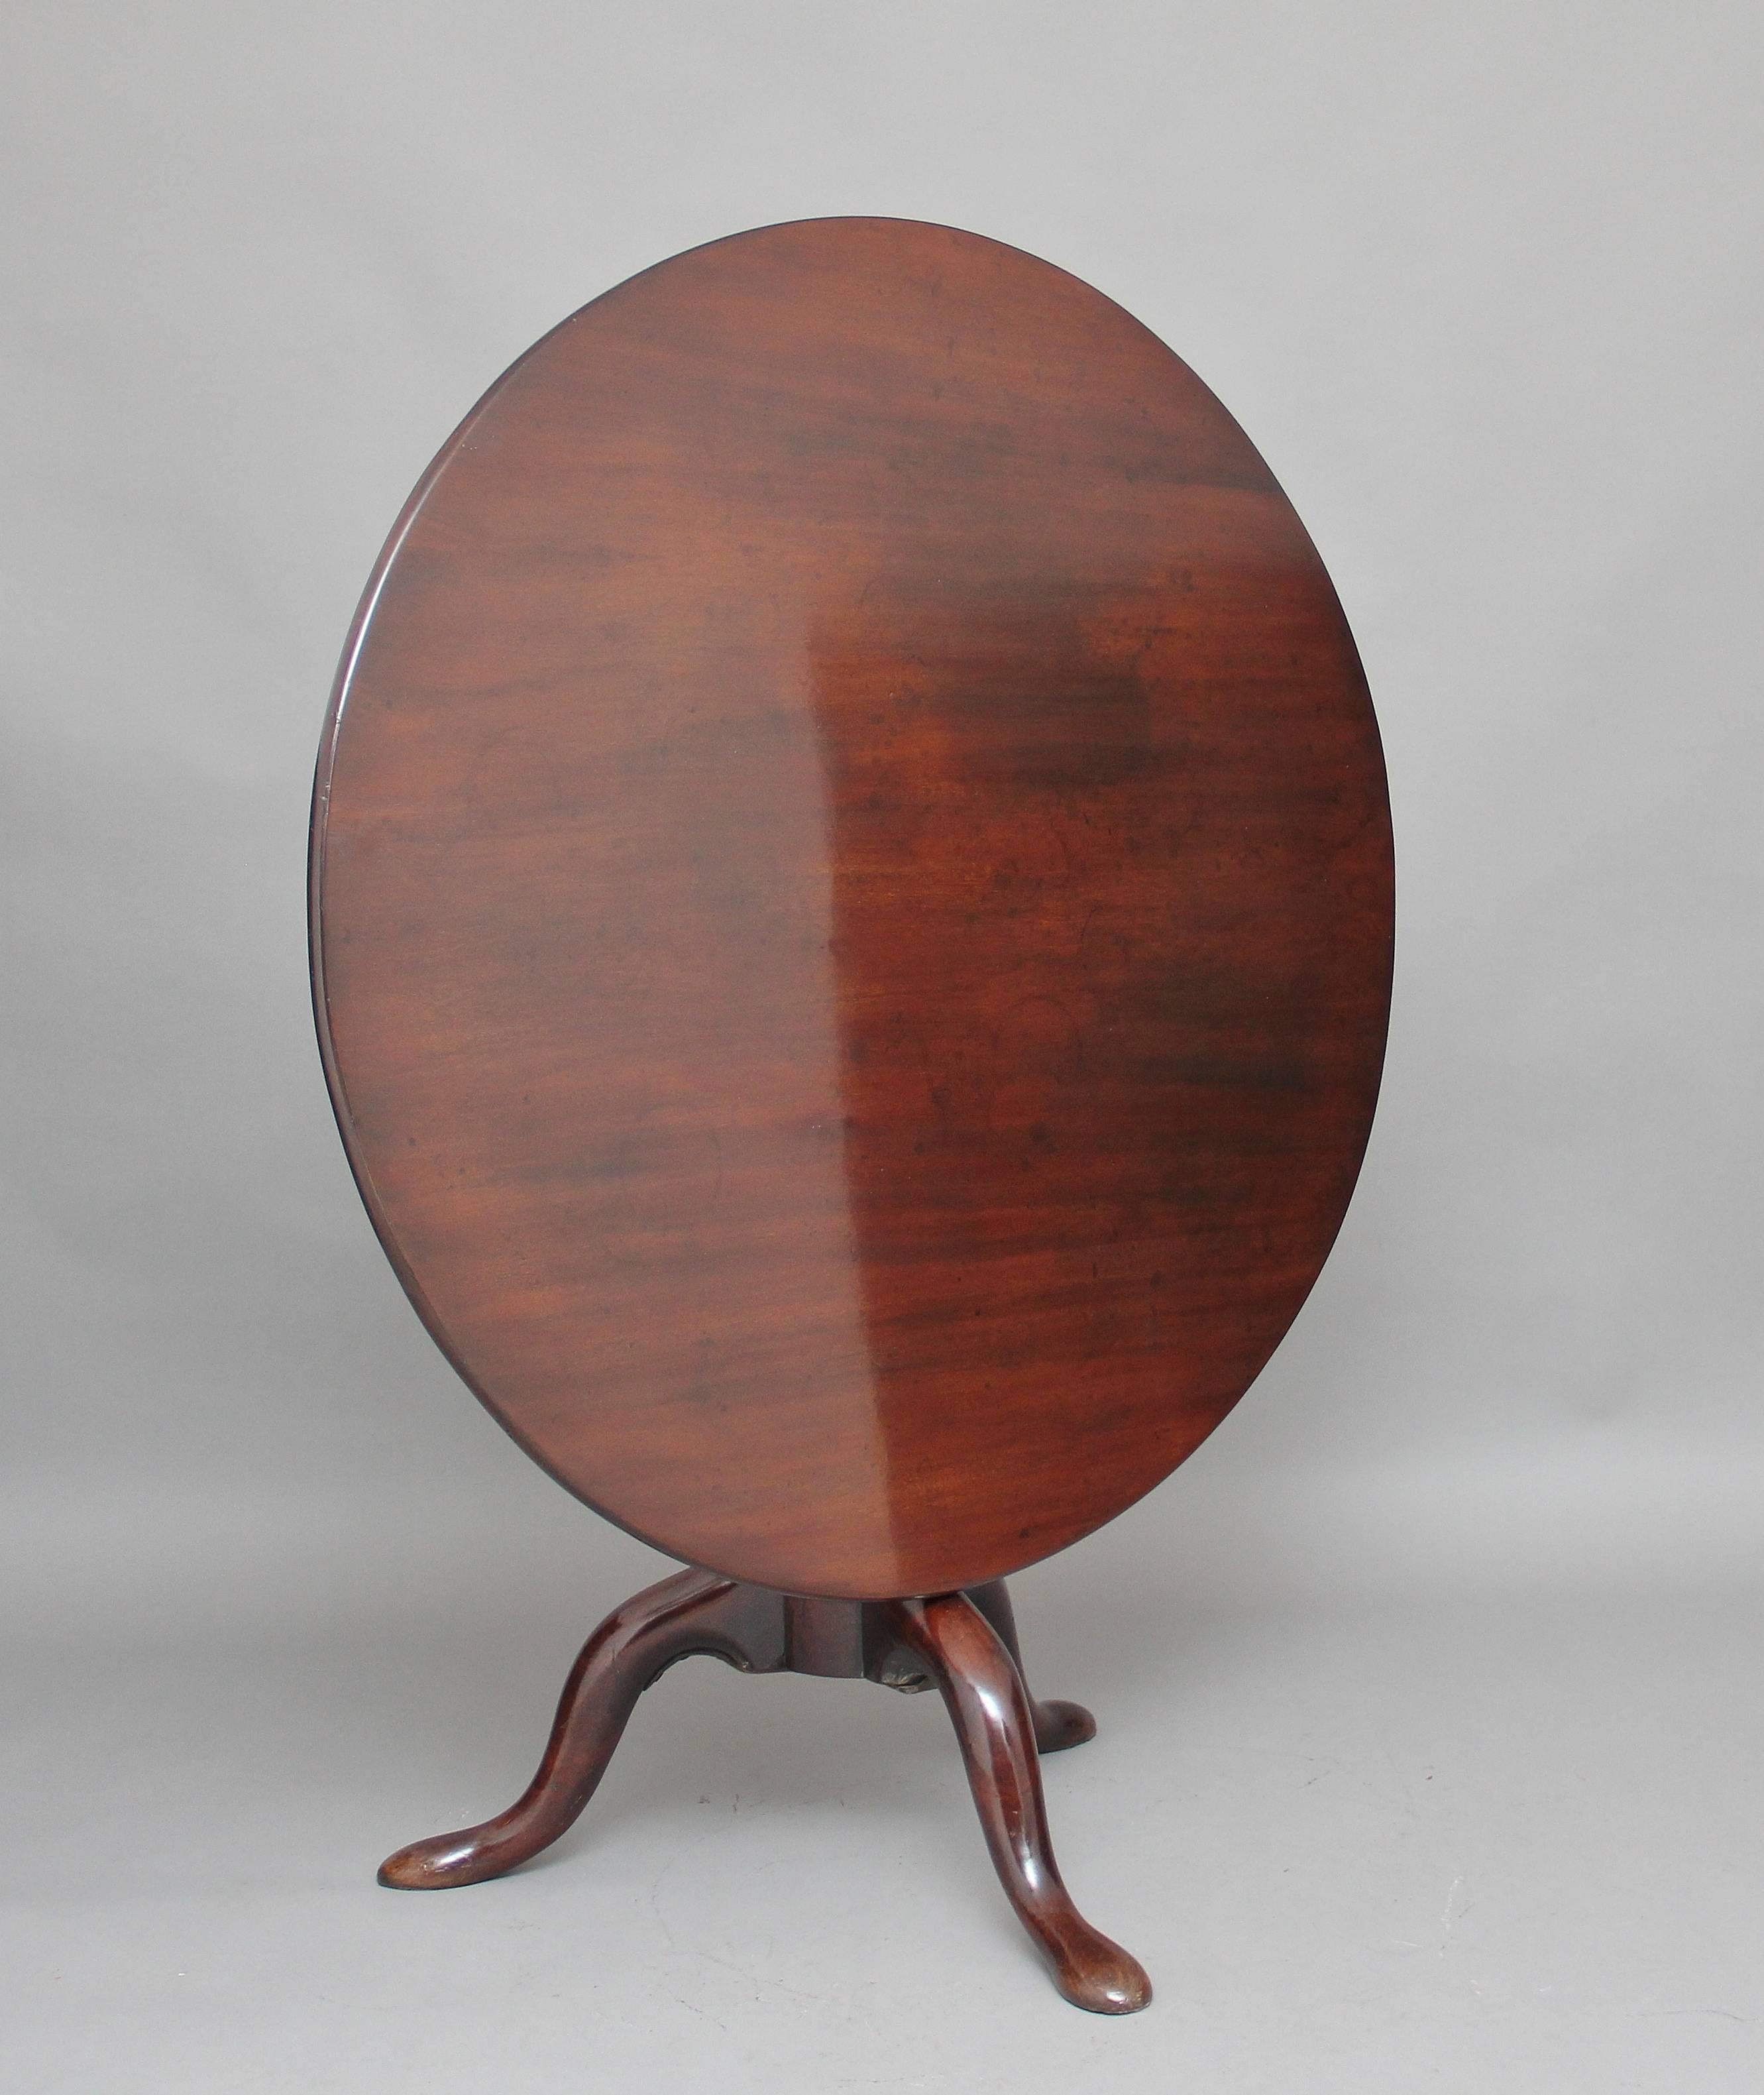 18th Century mahogany tripod table of large proportions, the circular mahogany top sitting on a birdcage mount so you can turn the top without turning the base, supported on a turned column terminating with three slender shaped legs.  Circa 1780.